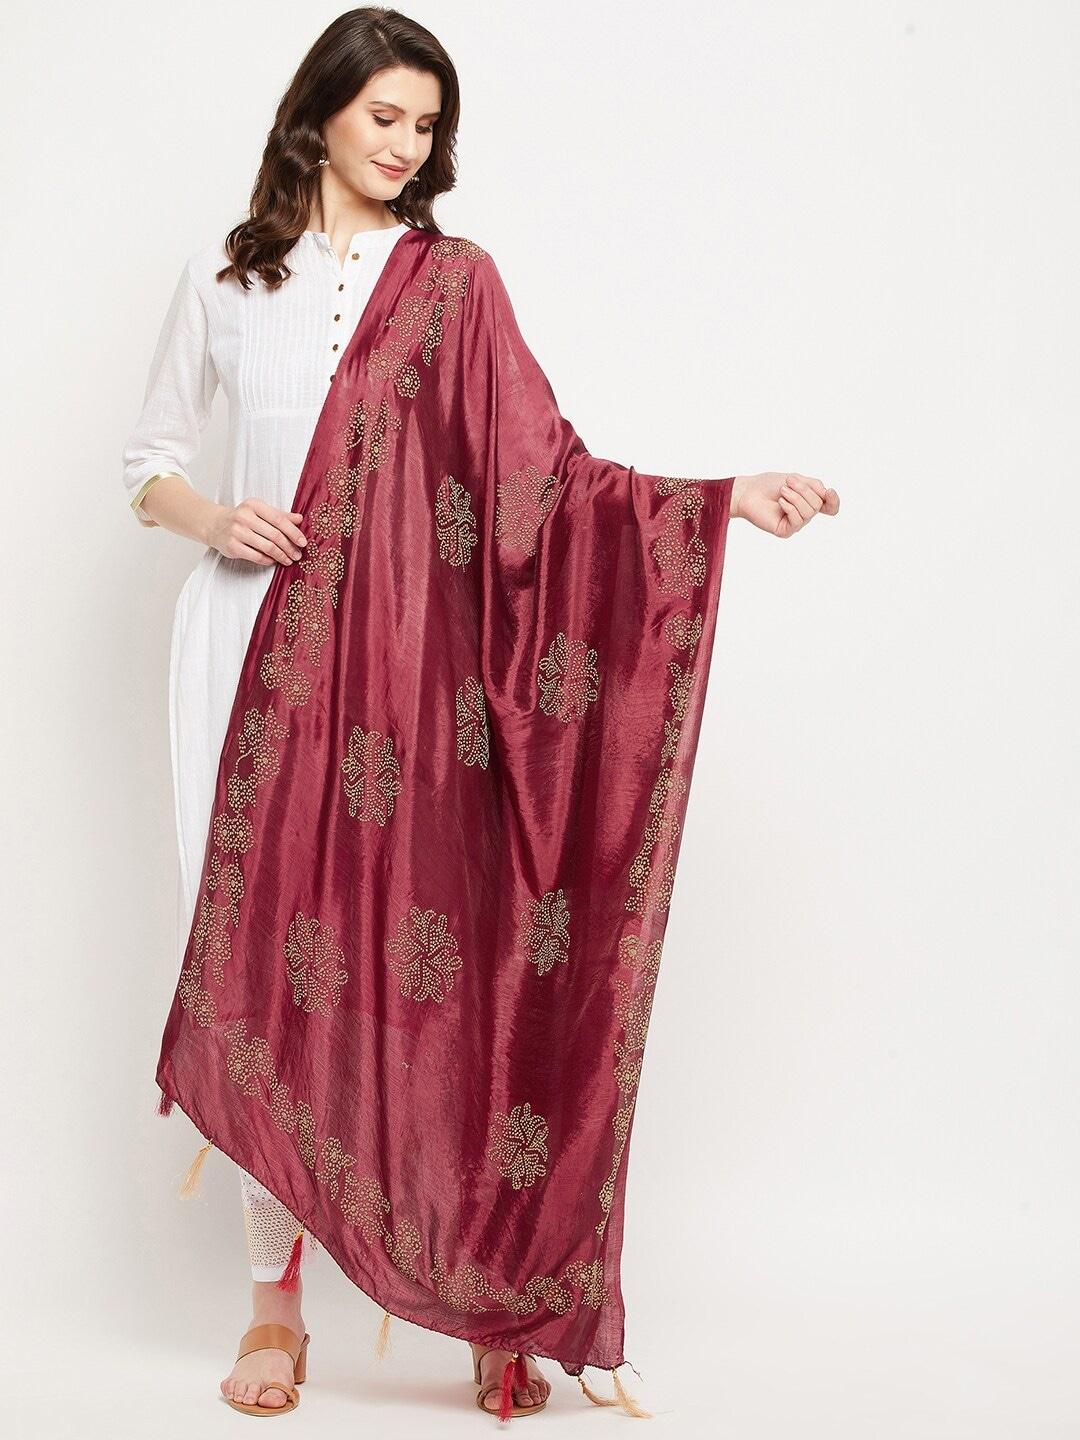 clora-creation-embroidered-dupatta-with-tassels